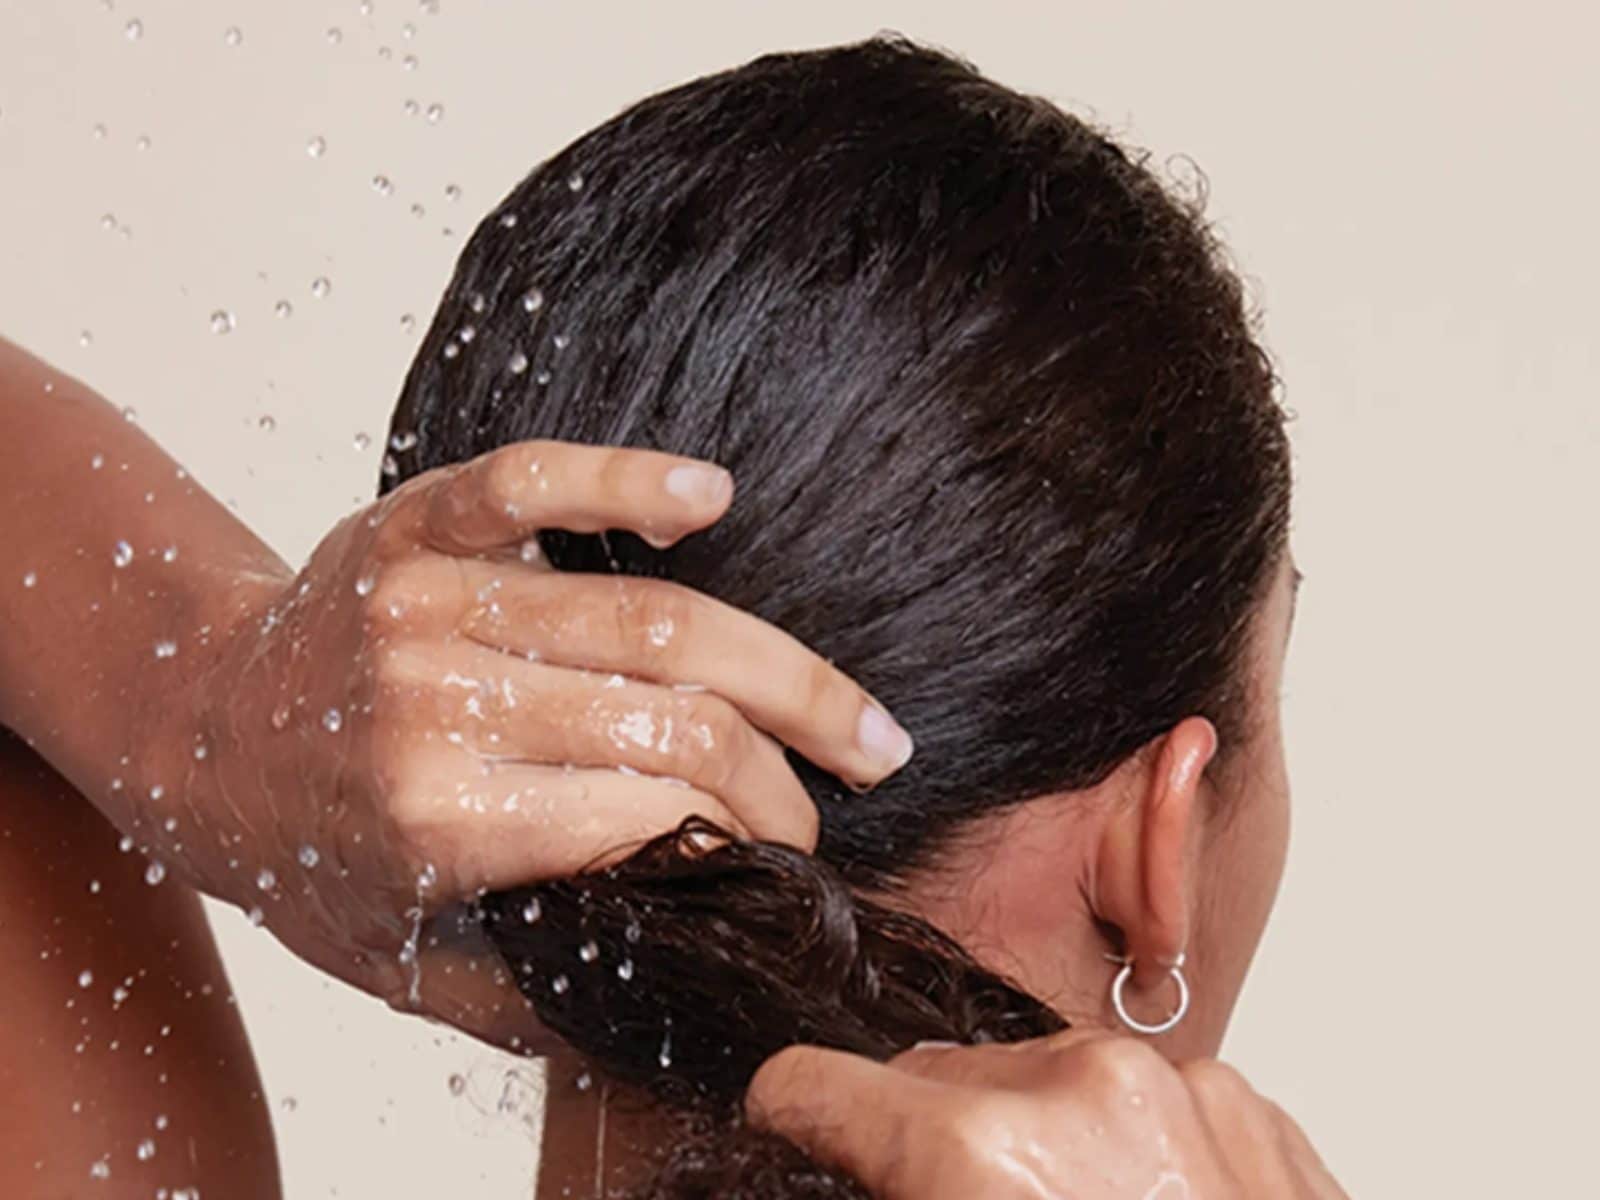 How to Wash Your Hair without Shampoo no greasy hair